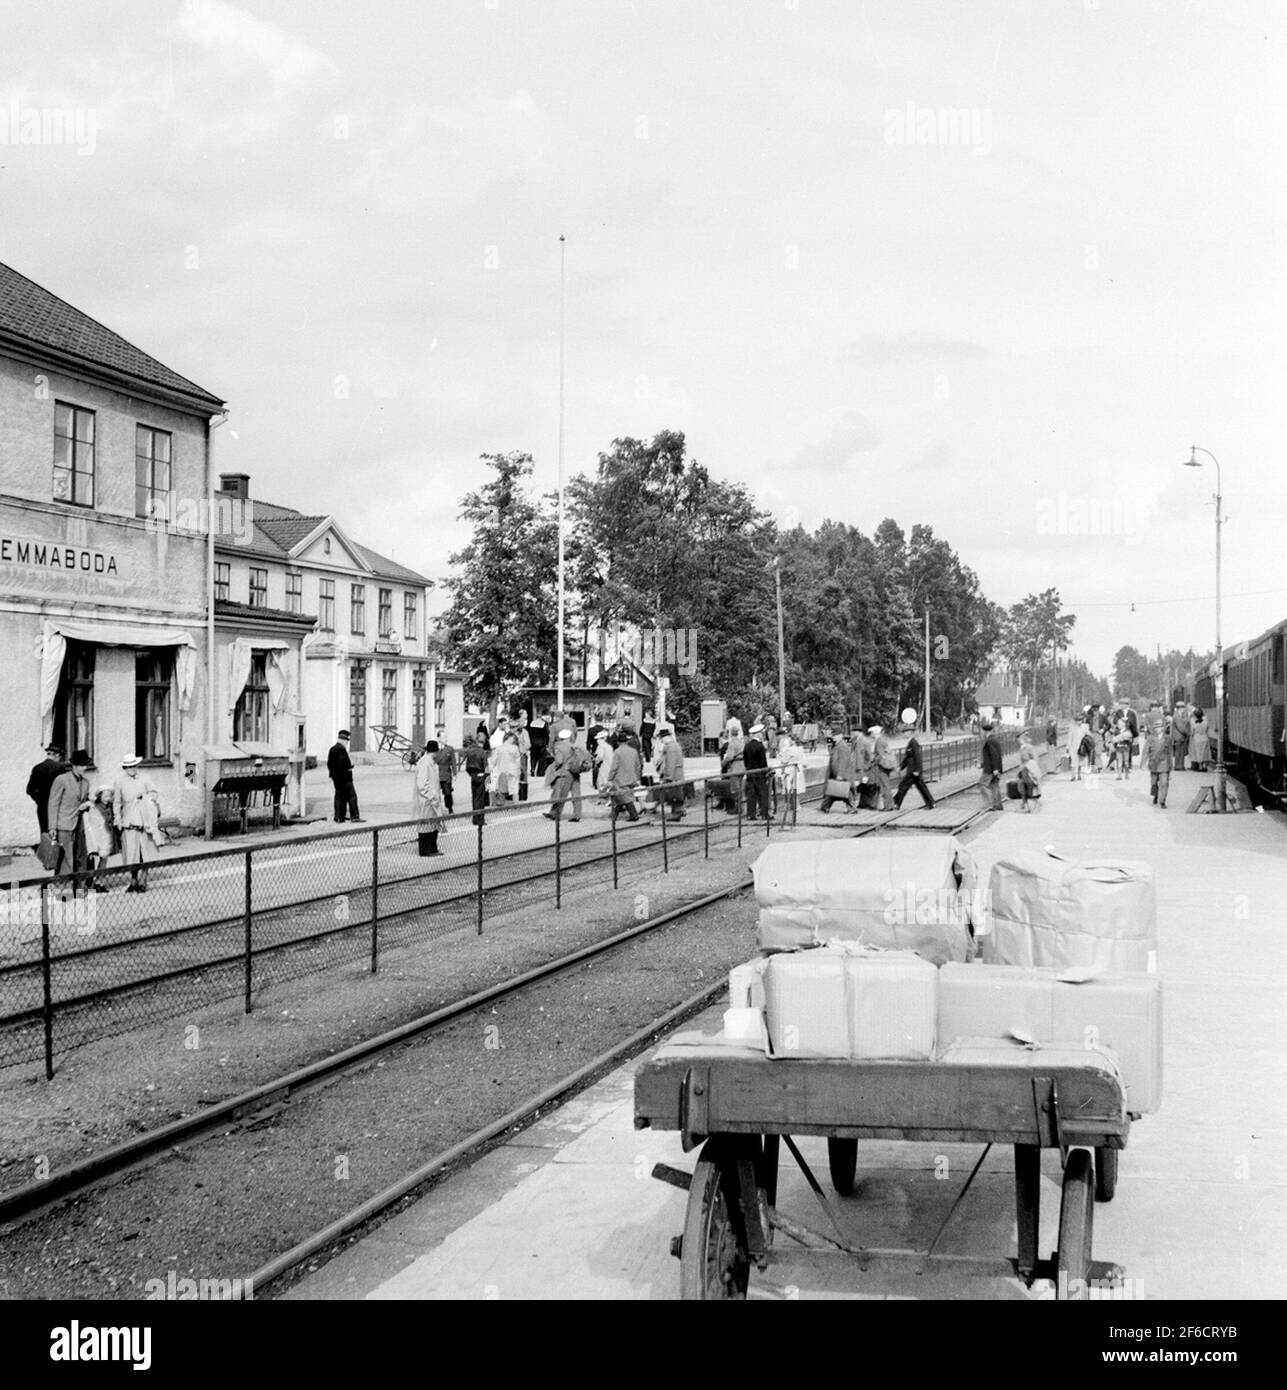 Emmaboda railway station. The passenger train consists of older cars manufactured before 1930. The telephone booth in the picture is of 1930s model, and the existence of military people among the travelers makes it likely that the picture is taken sometime during the war years. Stock Photo